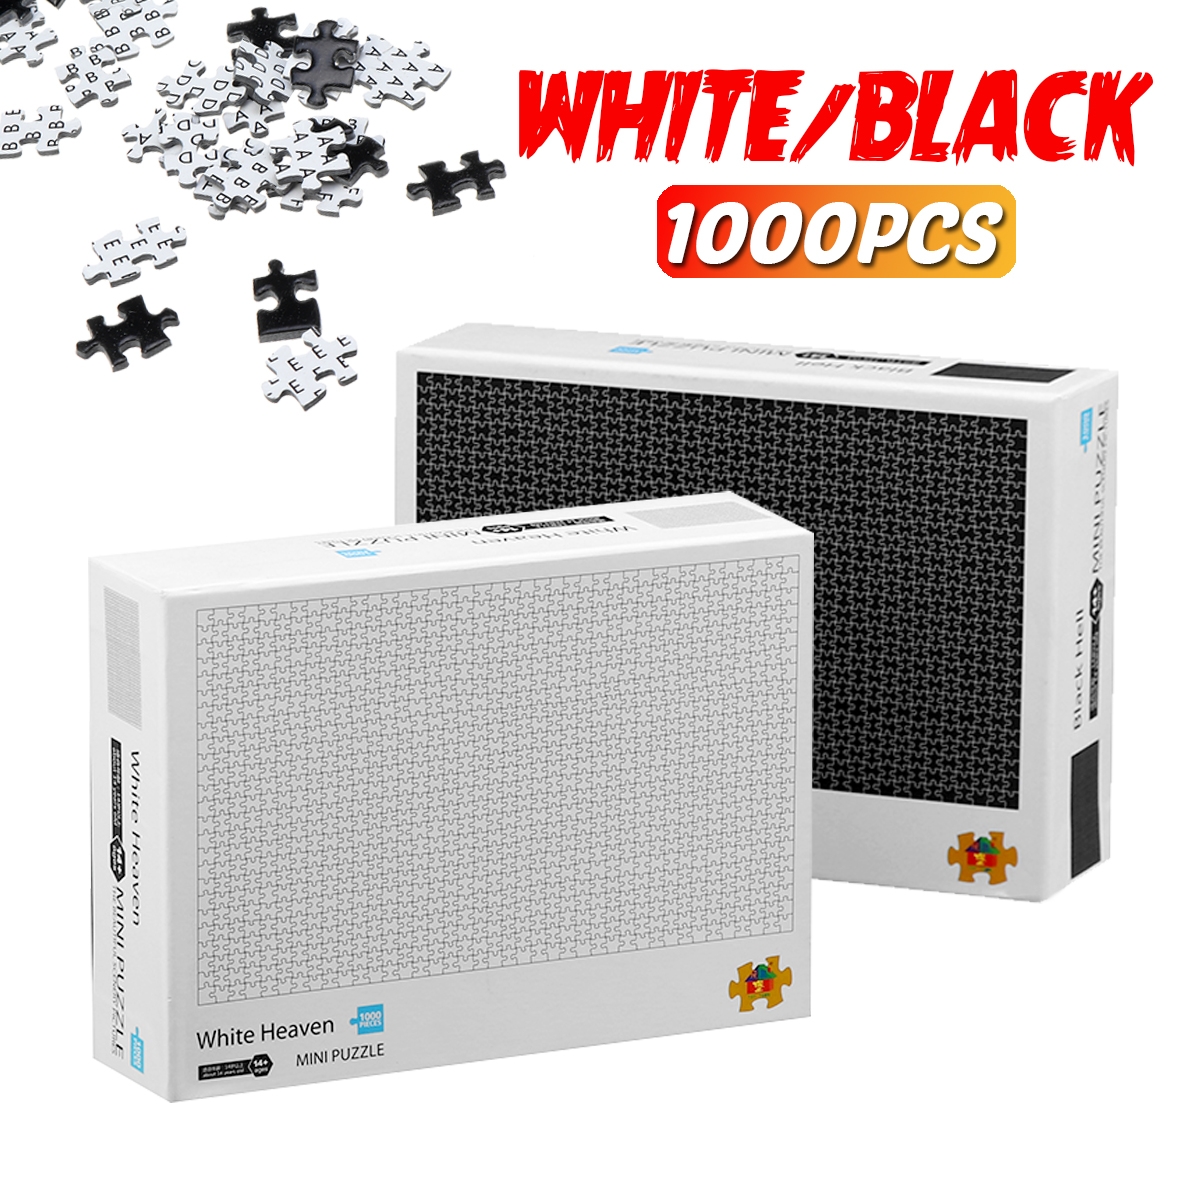 1000Pcs Pure Color White Black Paper Jigsaw Puzzle Toy DIY Assembly Educational Game Toy - Photo: 1